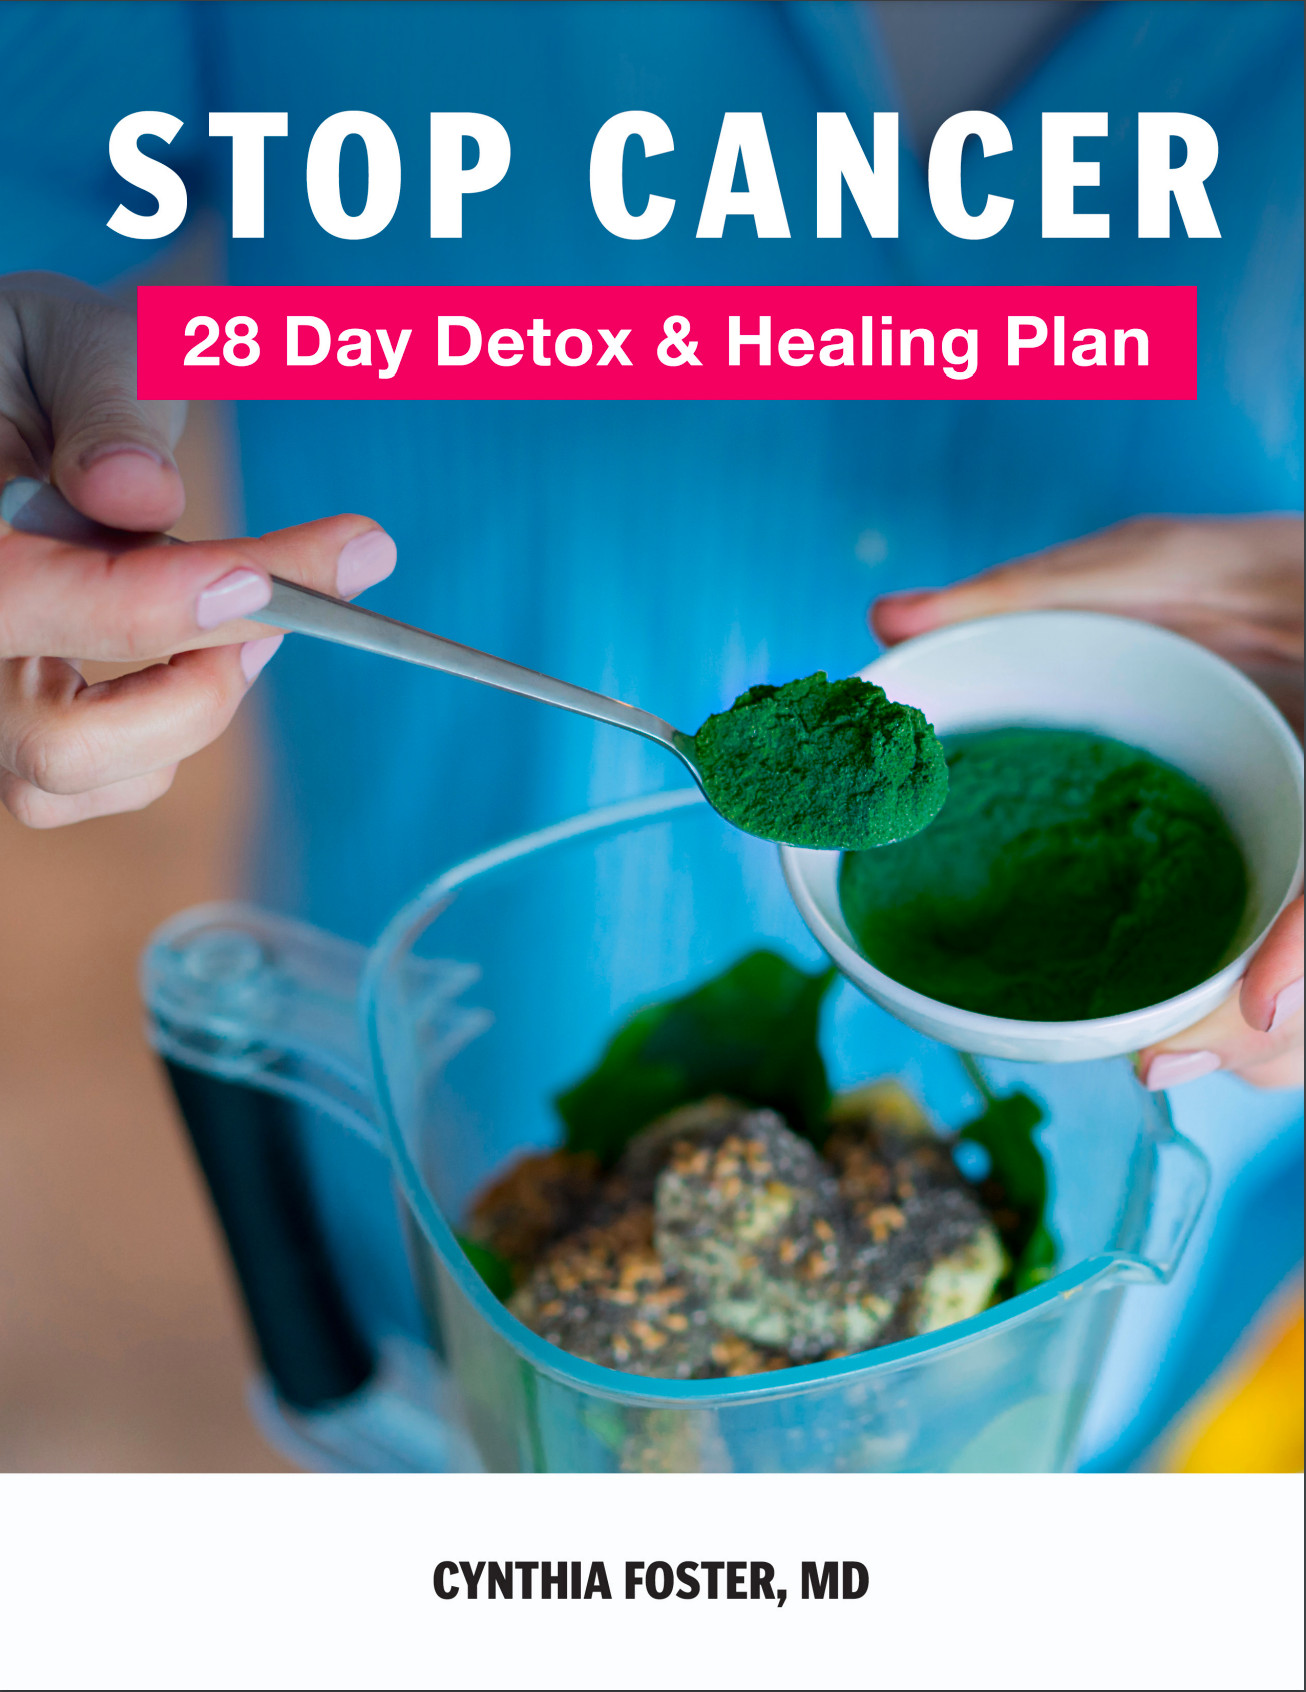 Cynthia Foster, MD - Stop Cancer - 28 Day Detox and Healing Plan - Stop Cancer Naturally Docu-Class